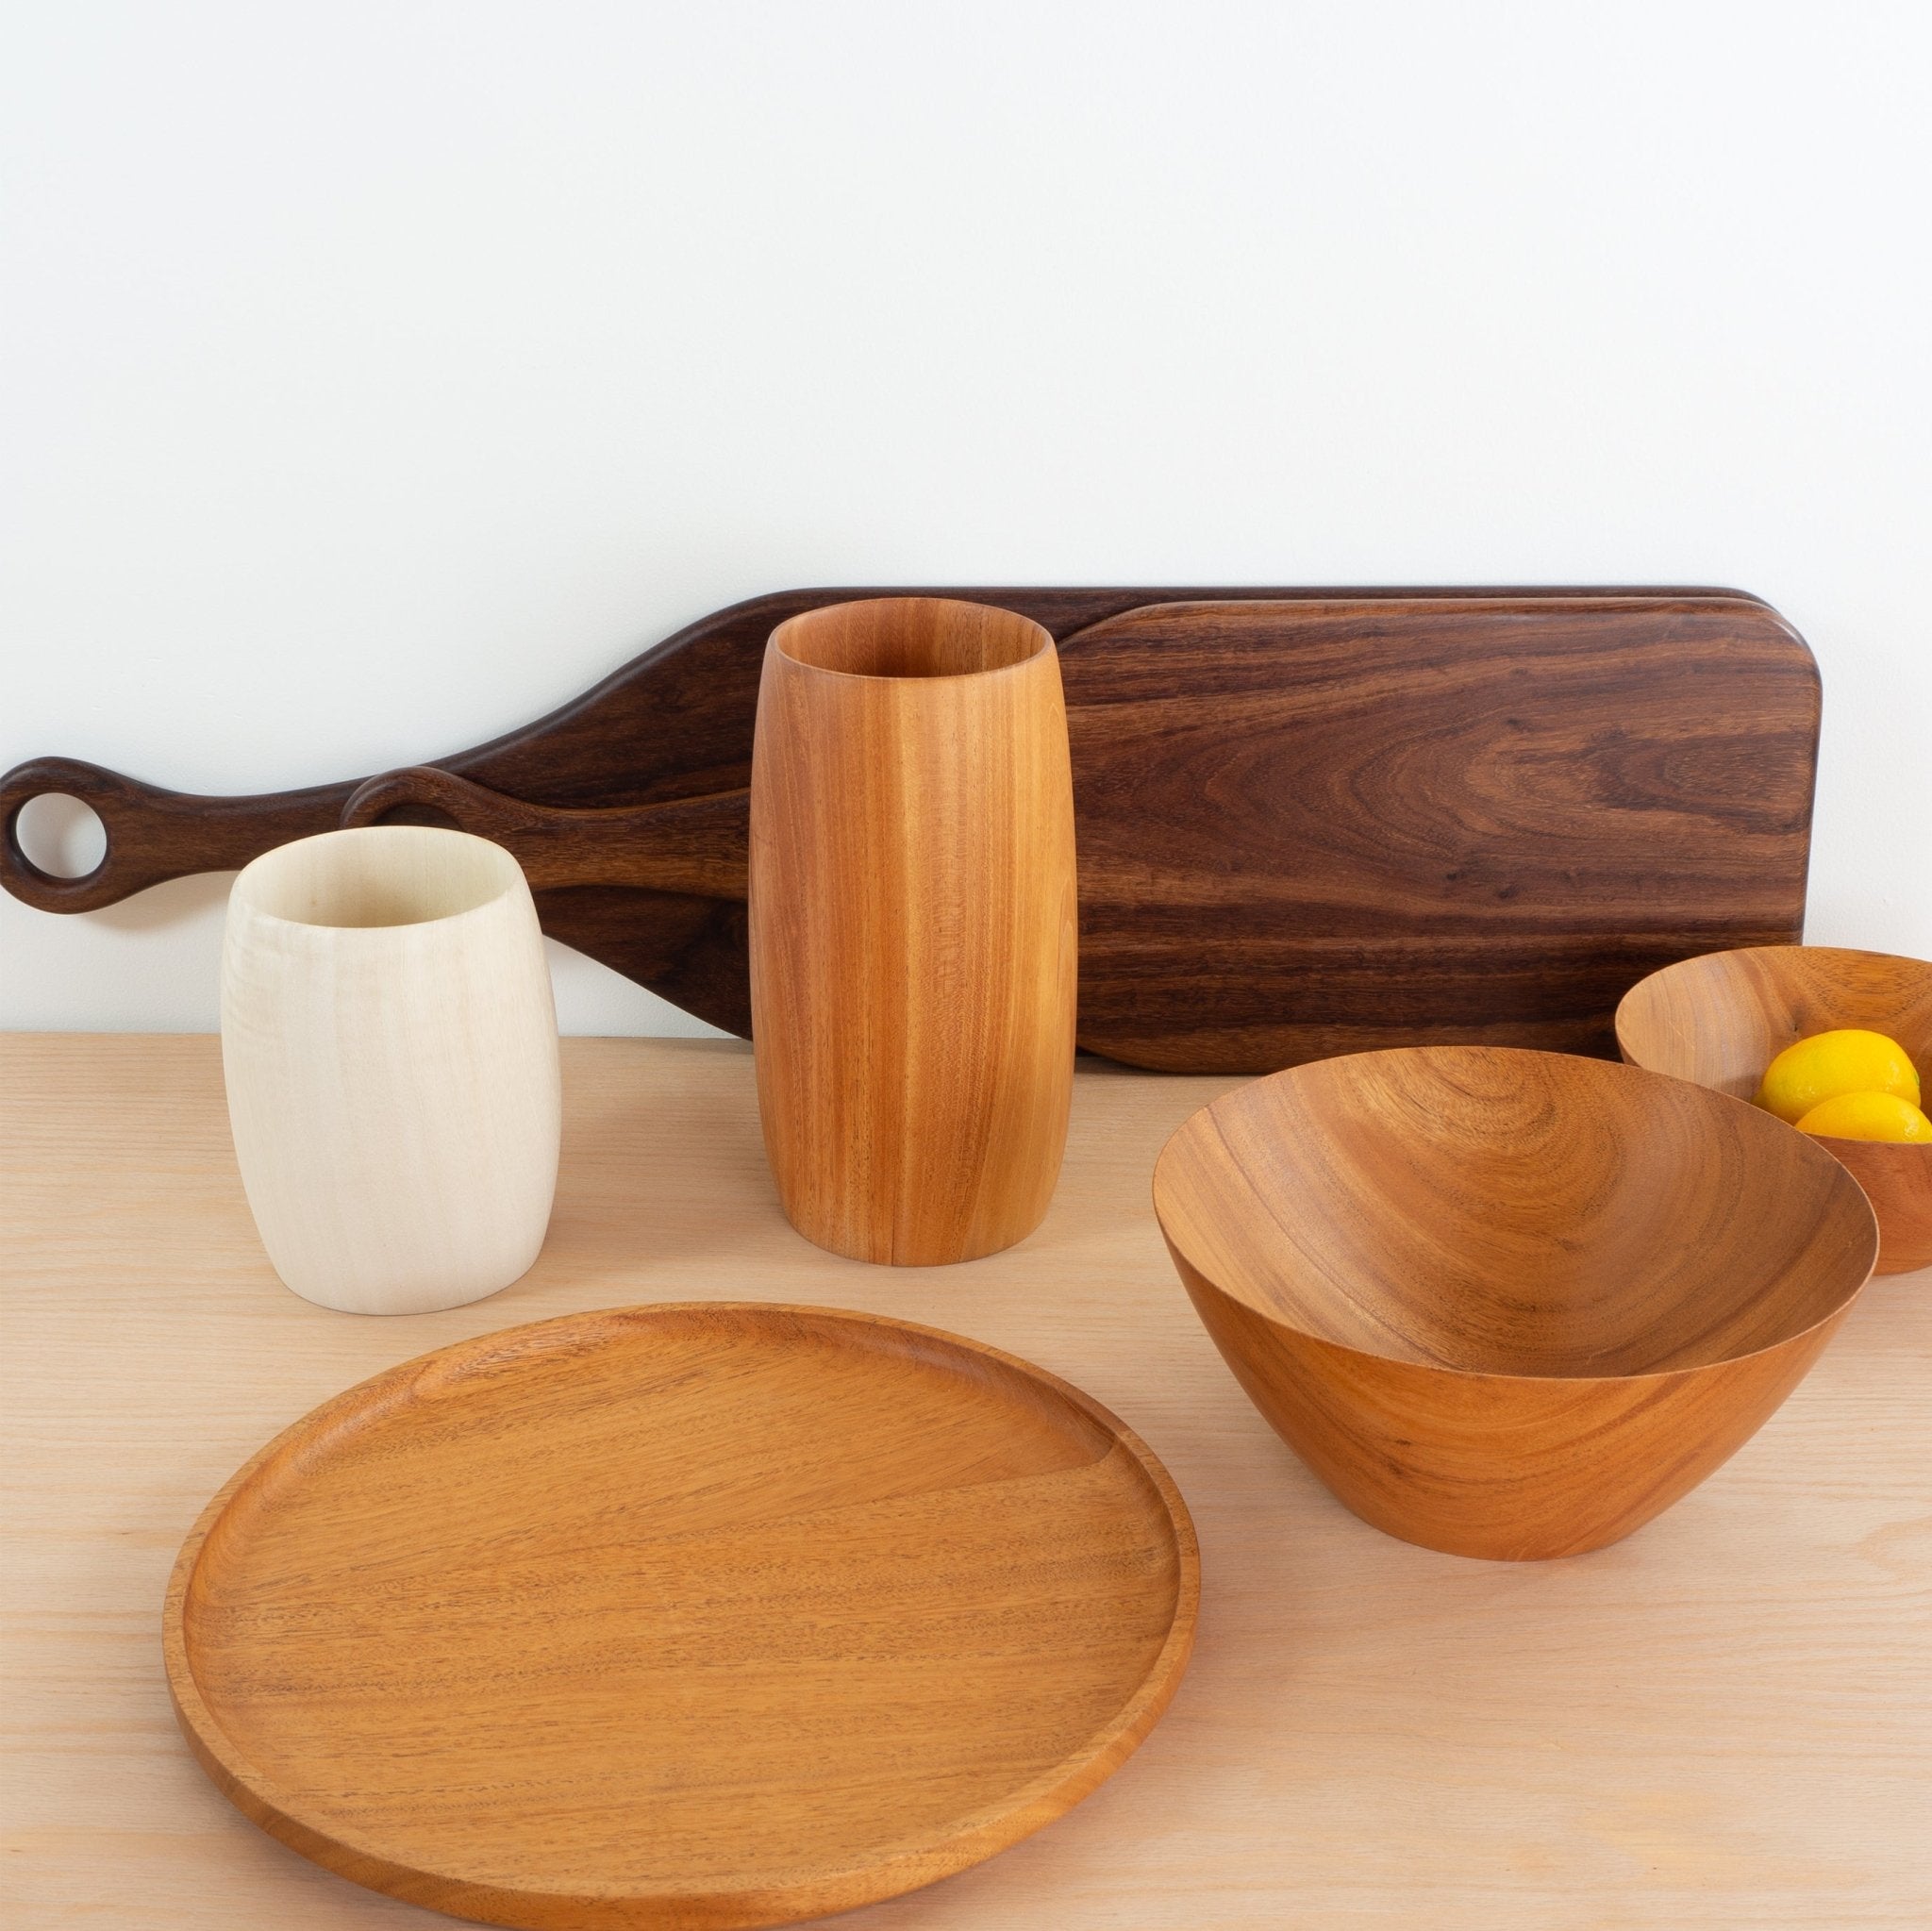 Collection of handwoven vases, paddle charcuterie boards, bowls and round serving platters in melina wood, mahogany and granadillo